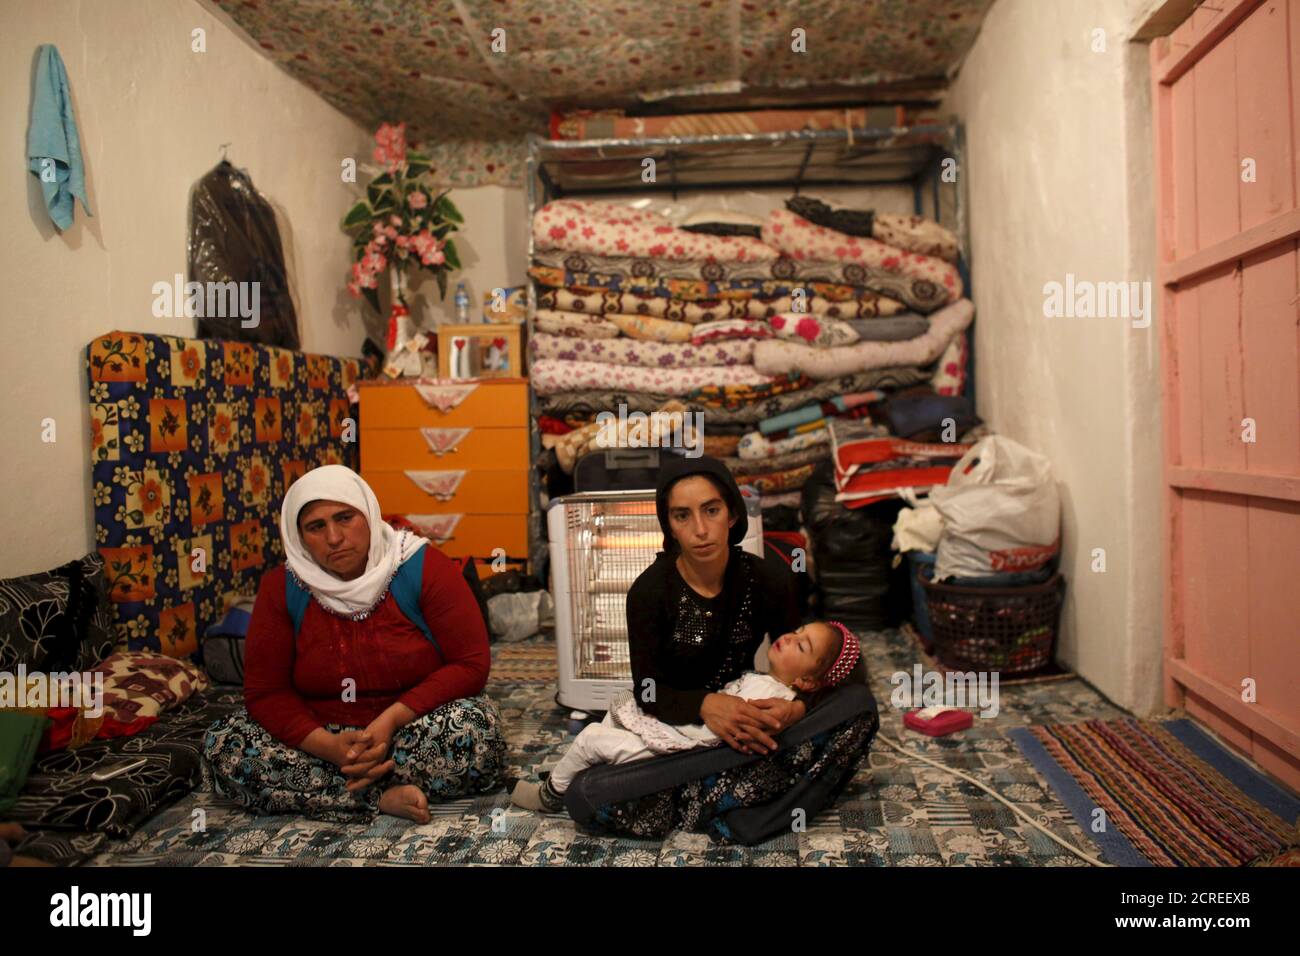 Sevgi Gezici, widow of Engin Gezici, holding her daughter Helin, sits next to her mother-in-law Seviye Gezici (L) at their family house in the southeastern town of Silvan in Diyarbakir province, Turkey, December 7, 2015. The shepherd's widow no longer asks God for peace. Like many Kurds in Turkey's southeast, Sevgi Gezici, 22, believed President Tayyip Erdogan would relent in a violent clampdown against Kurdish militants after his party won back its majority in an election in November. Three days after the vote, her husband, just back from seven months tending sheep, was shot dead in the stree Stock Photo